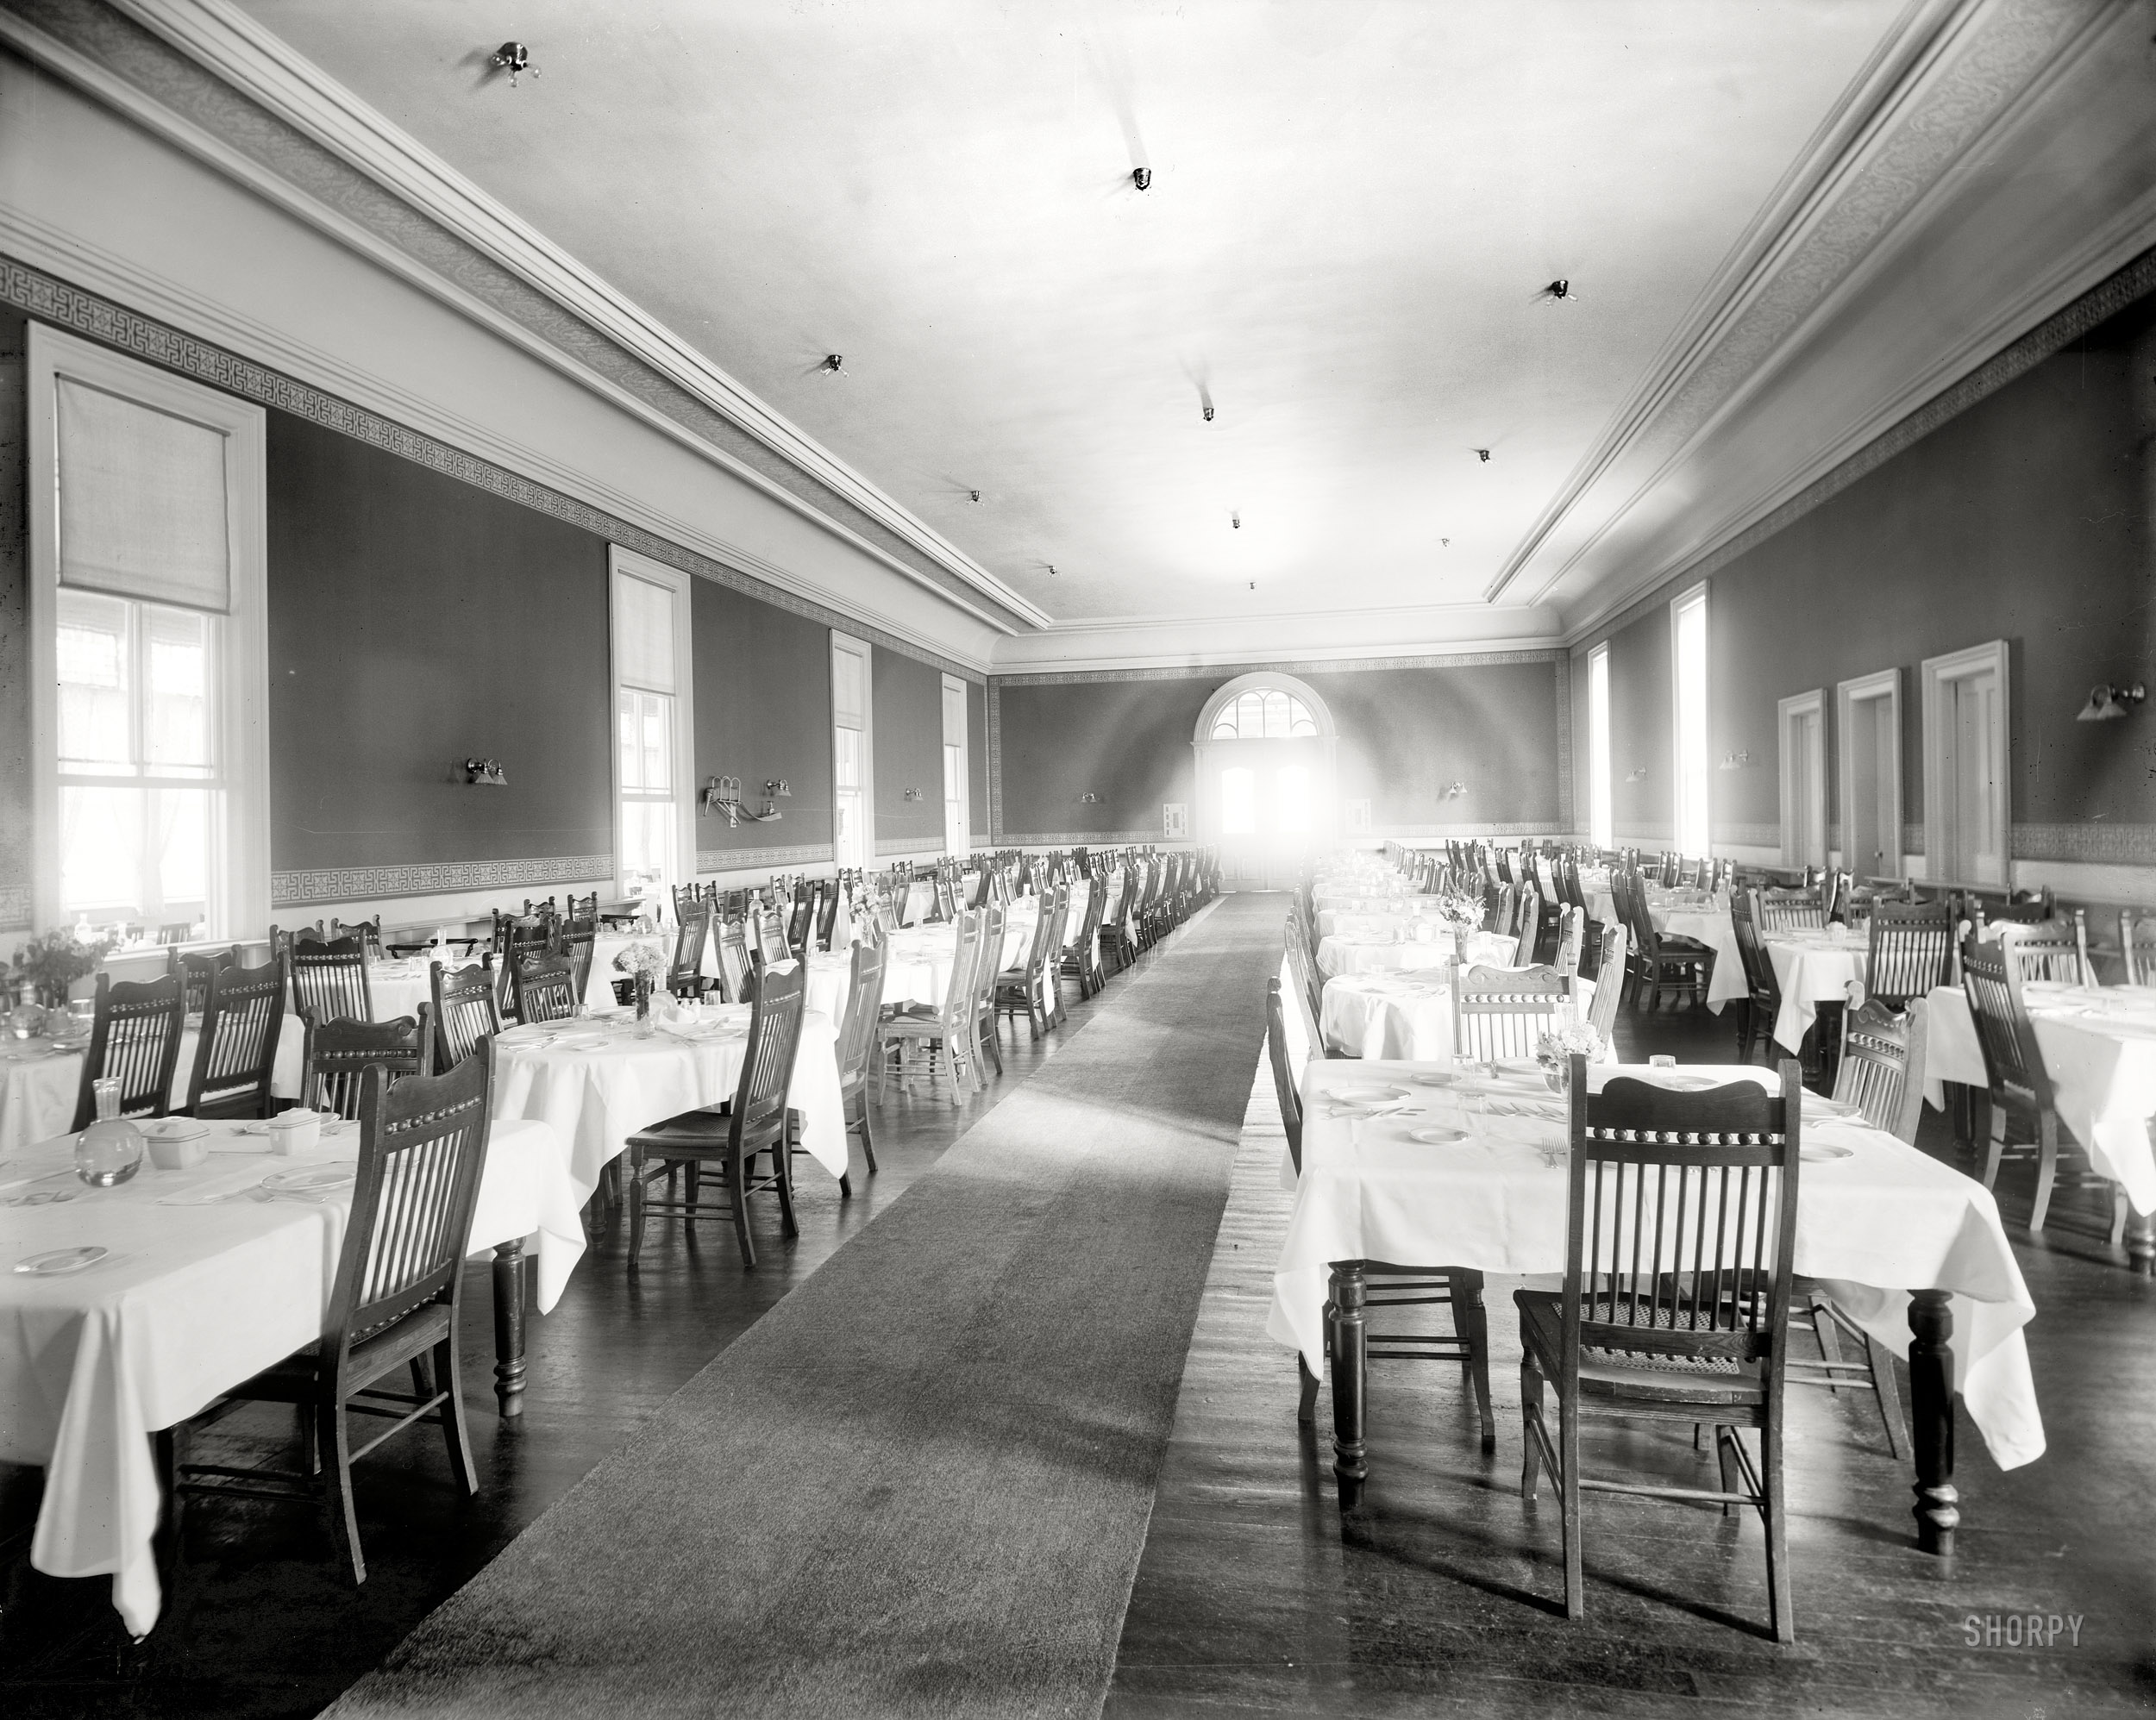 Lake George, New York, circa 1908. "Main dining room, Fort William Henry Hotel." Two for dinner? Excellent. But there's a wait. View full size.